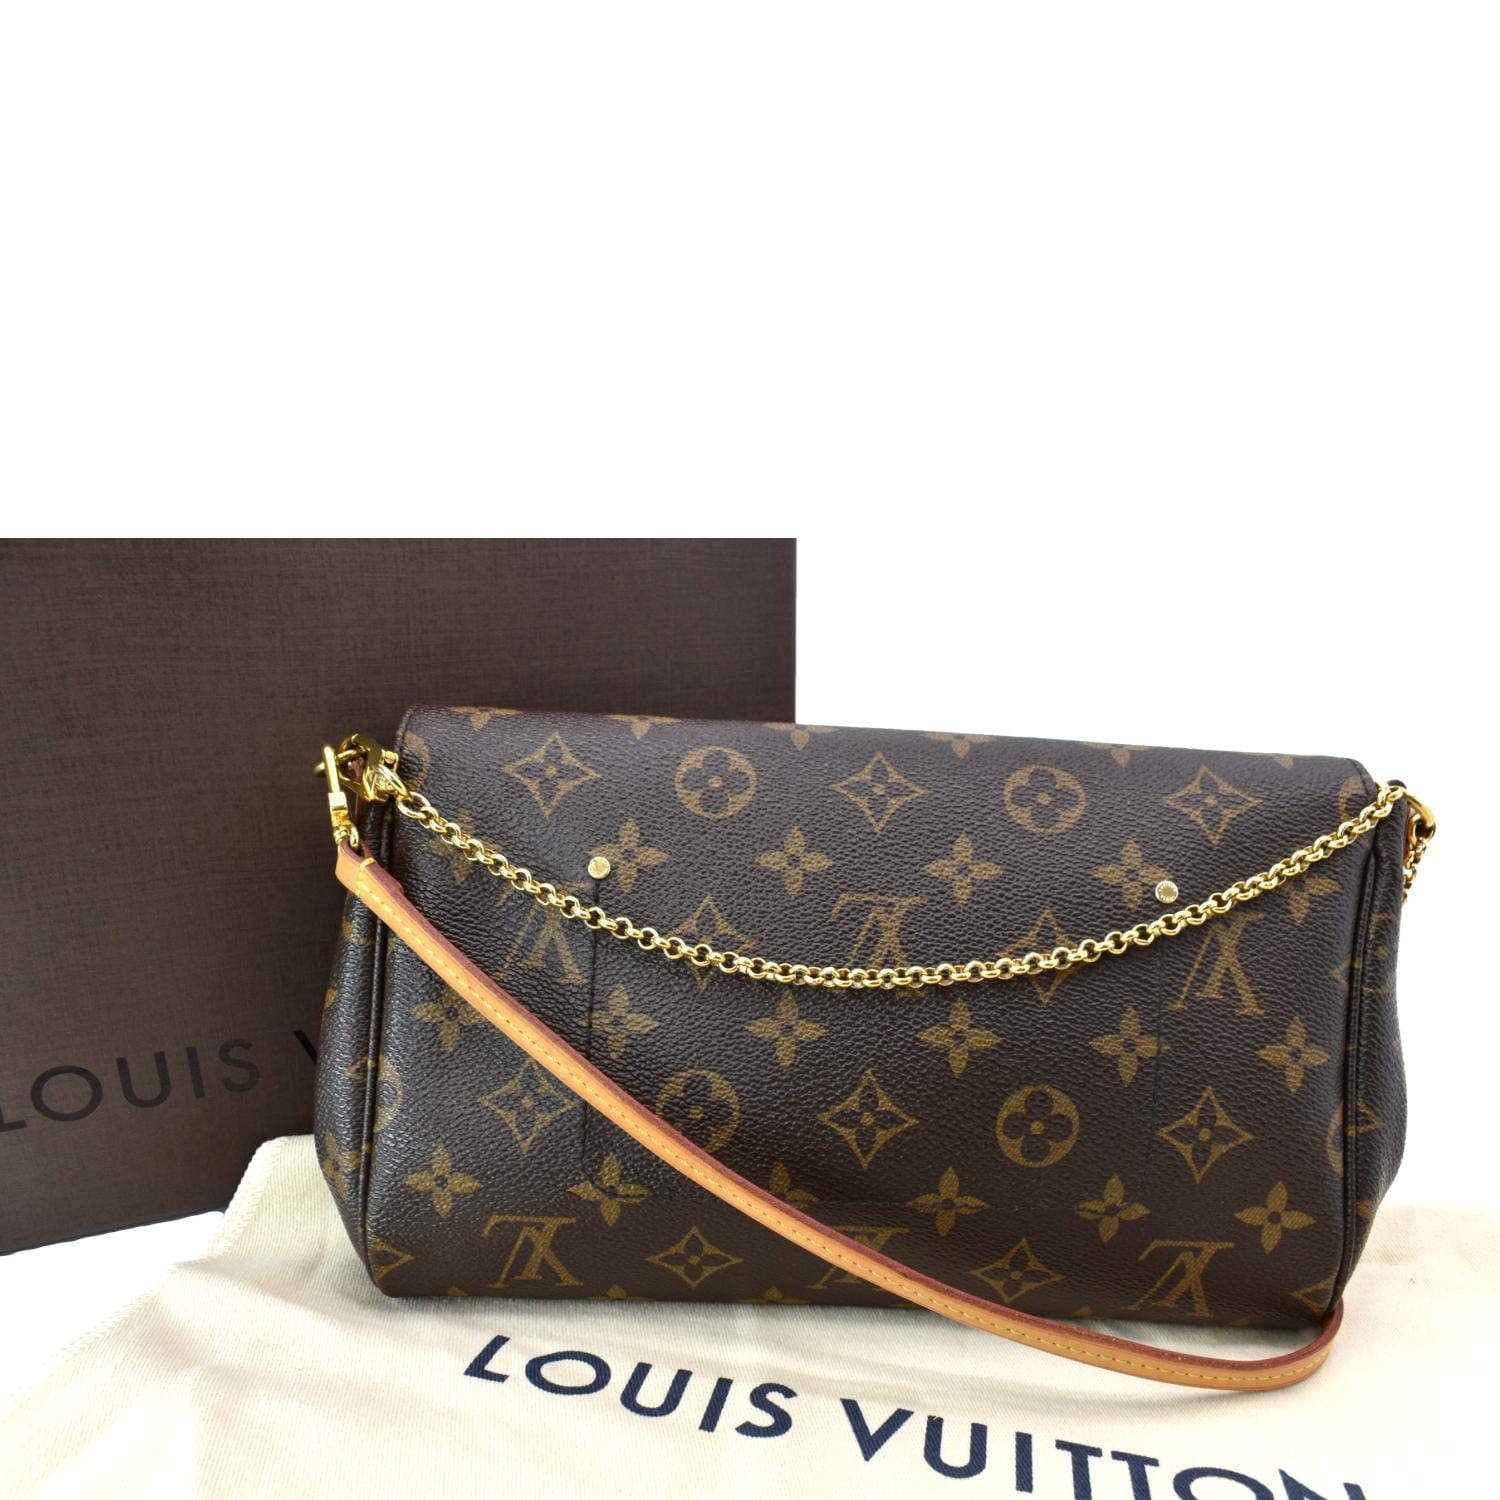 👜 Top 6 Best Louis Vuitton Bag For Everyday Use 2023 👜 - Louis Vuitton  Bags Worth the Investment 